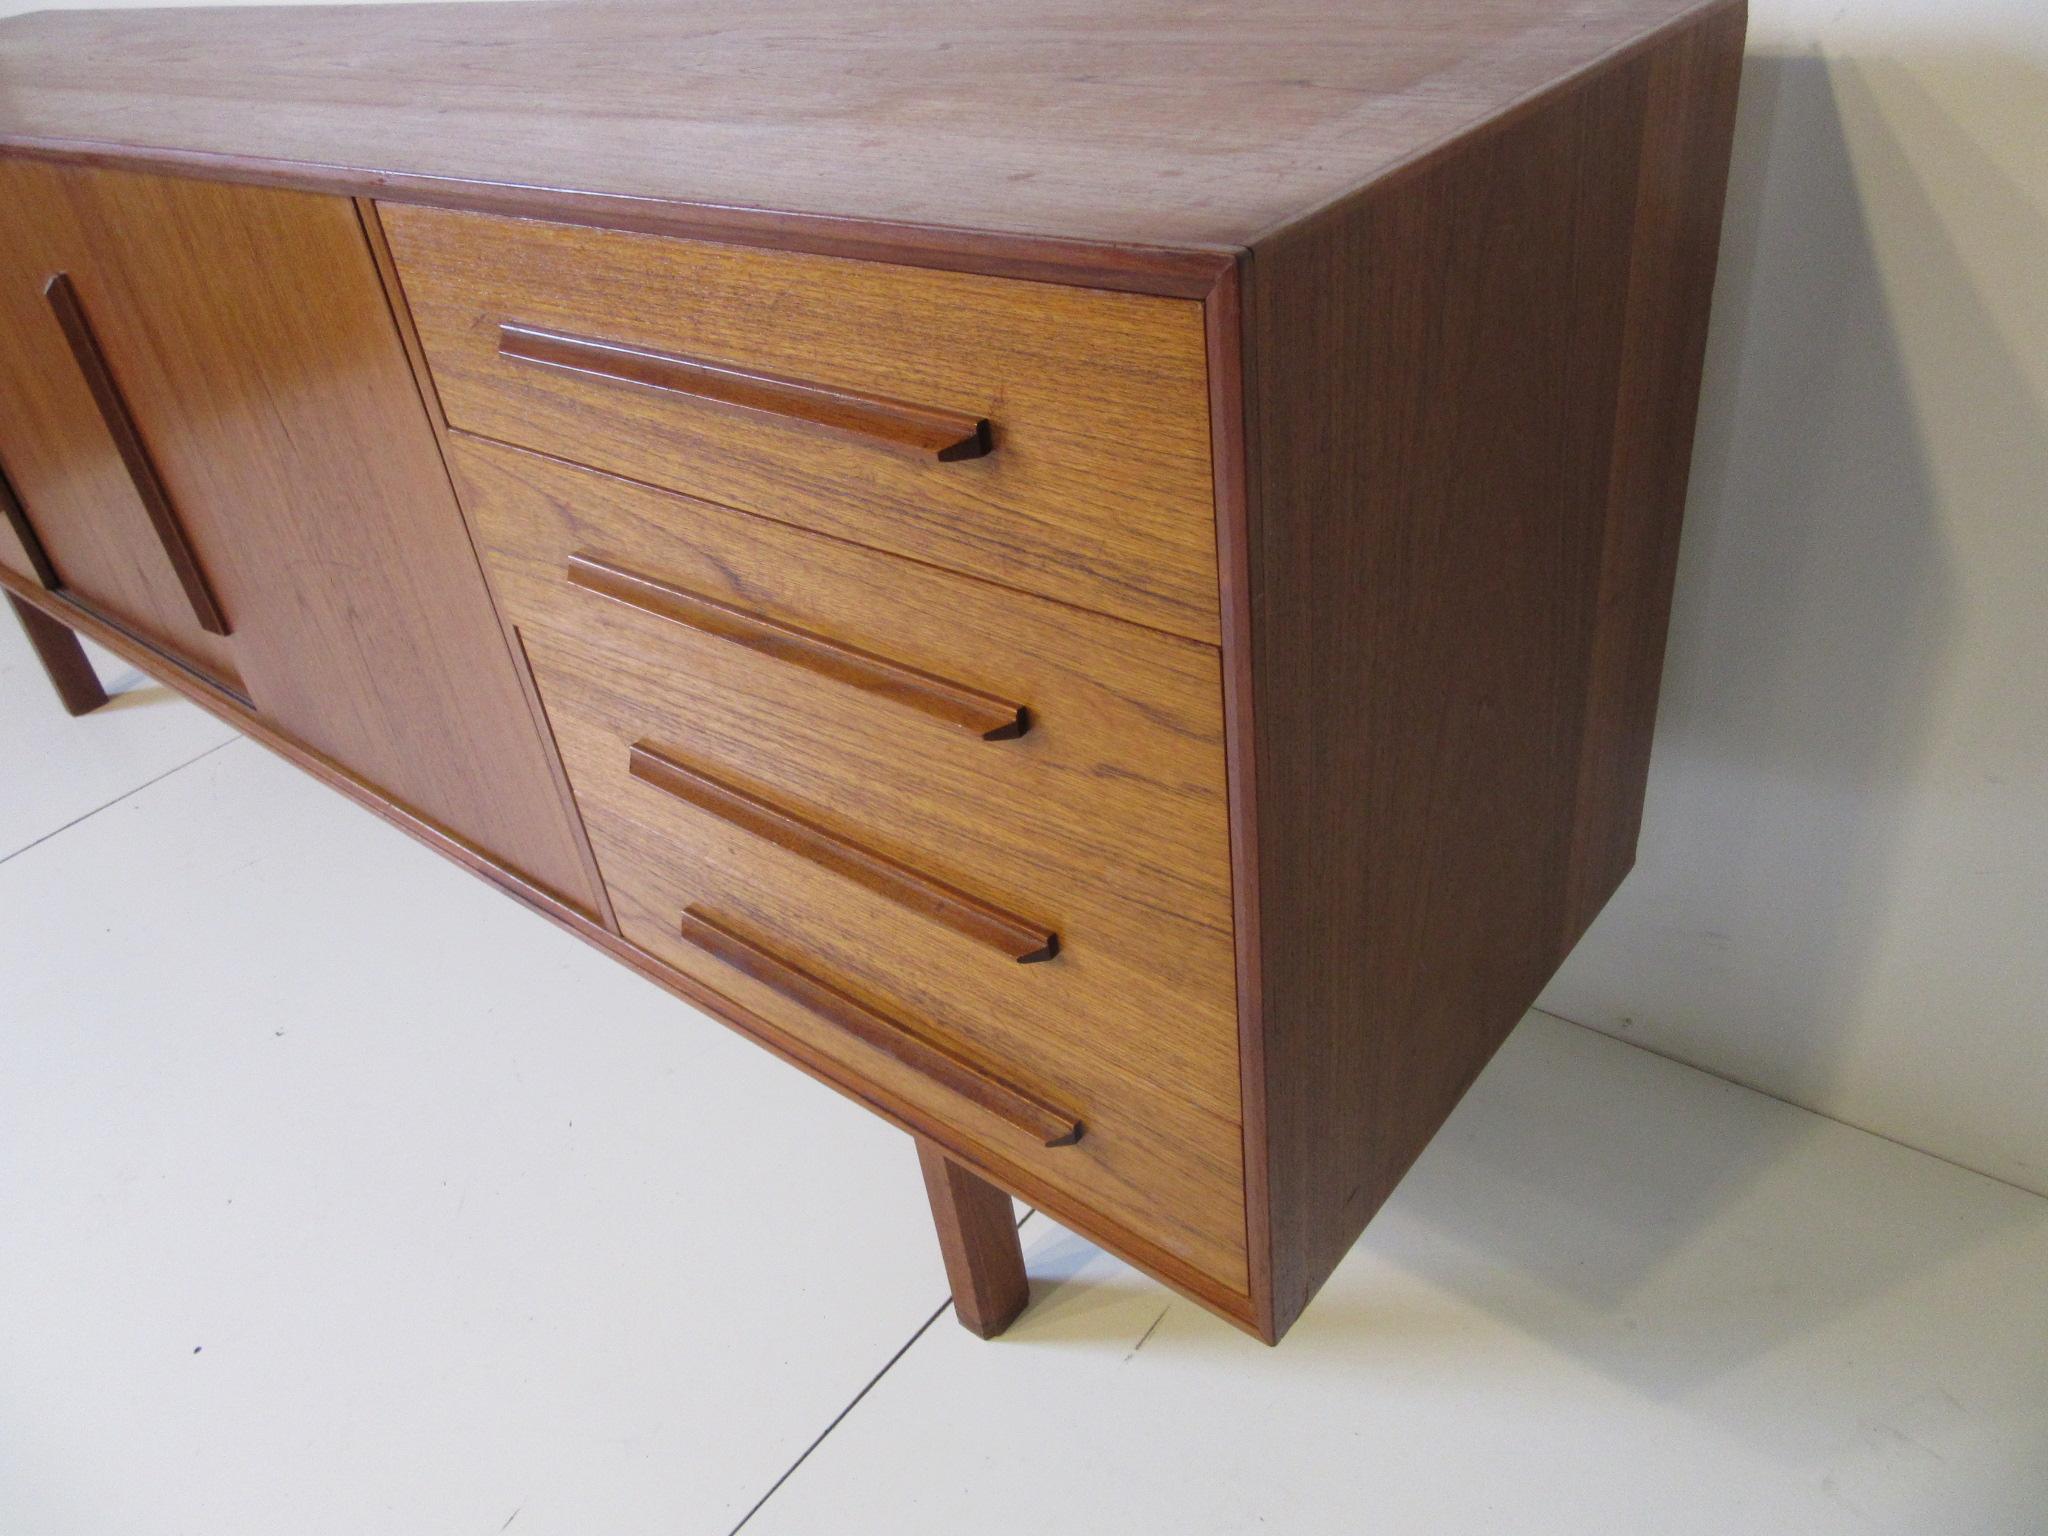 Long Danish Credenza or Sideboard in the style of IB Kofod-Larsen 2